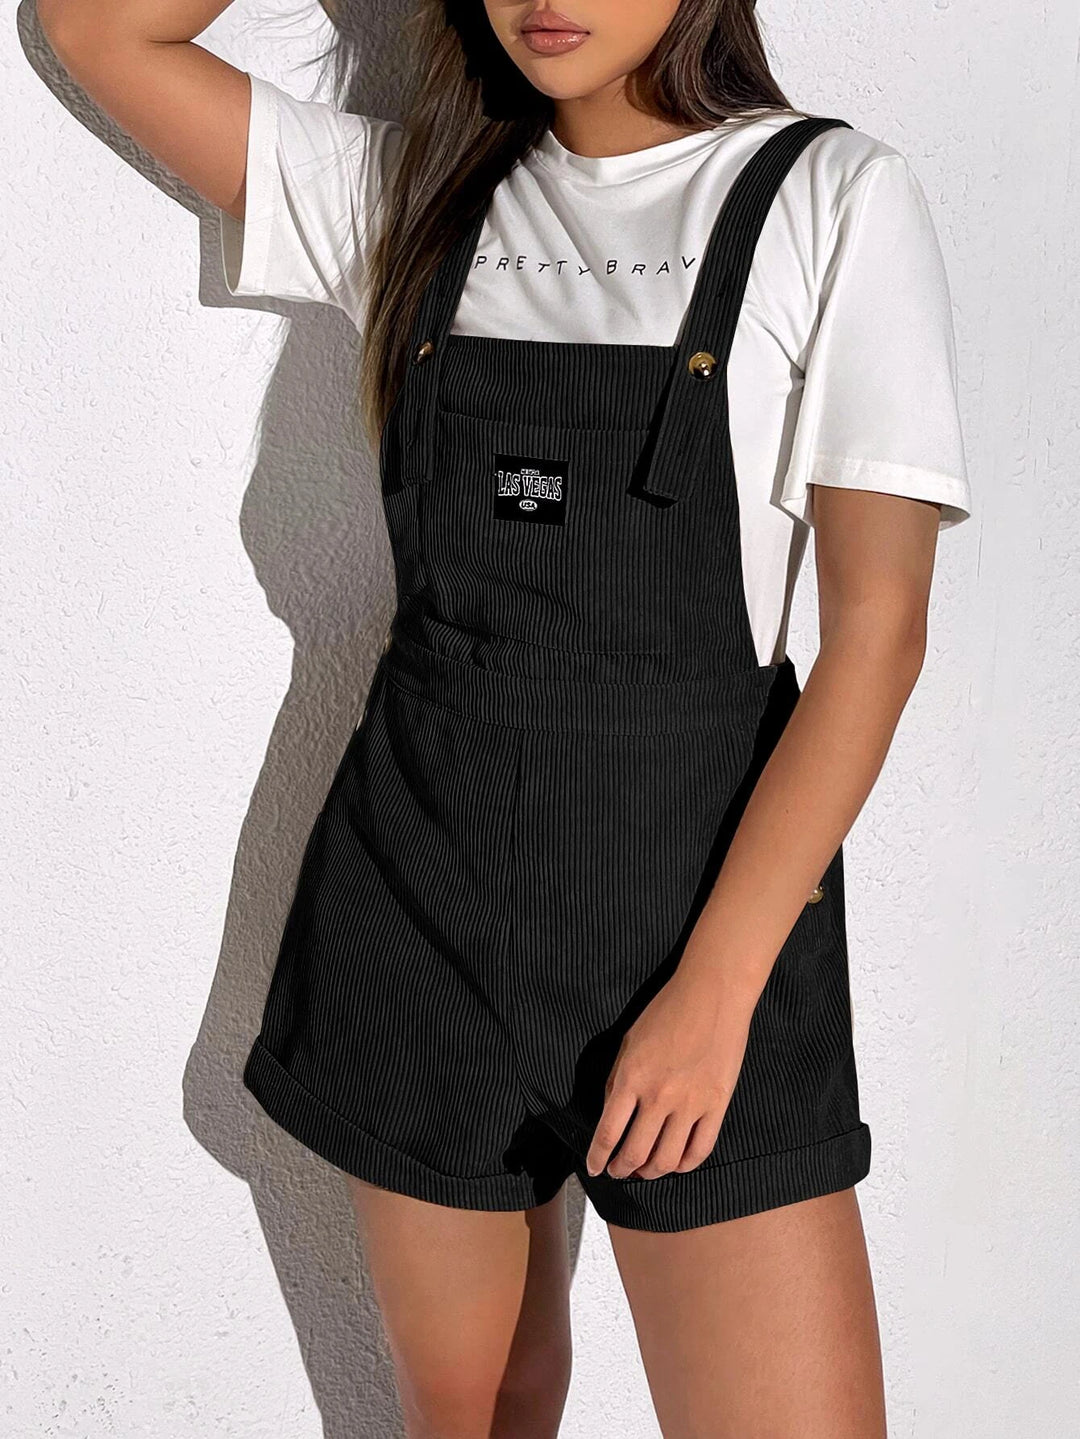 Patched Pockets Sleeveless Short Romper